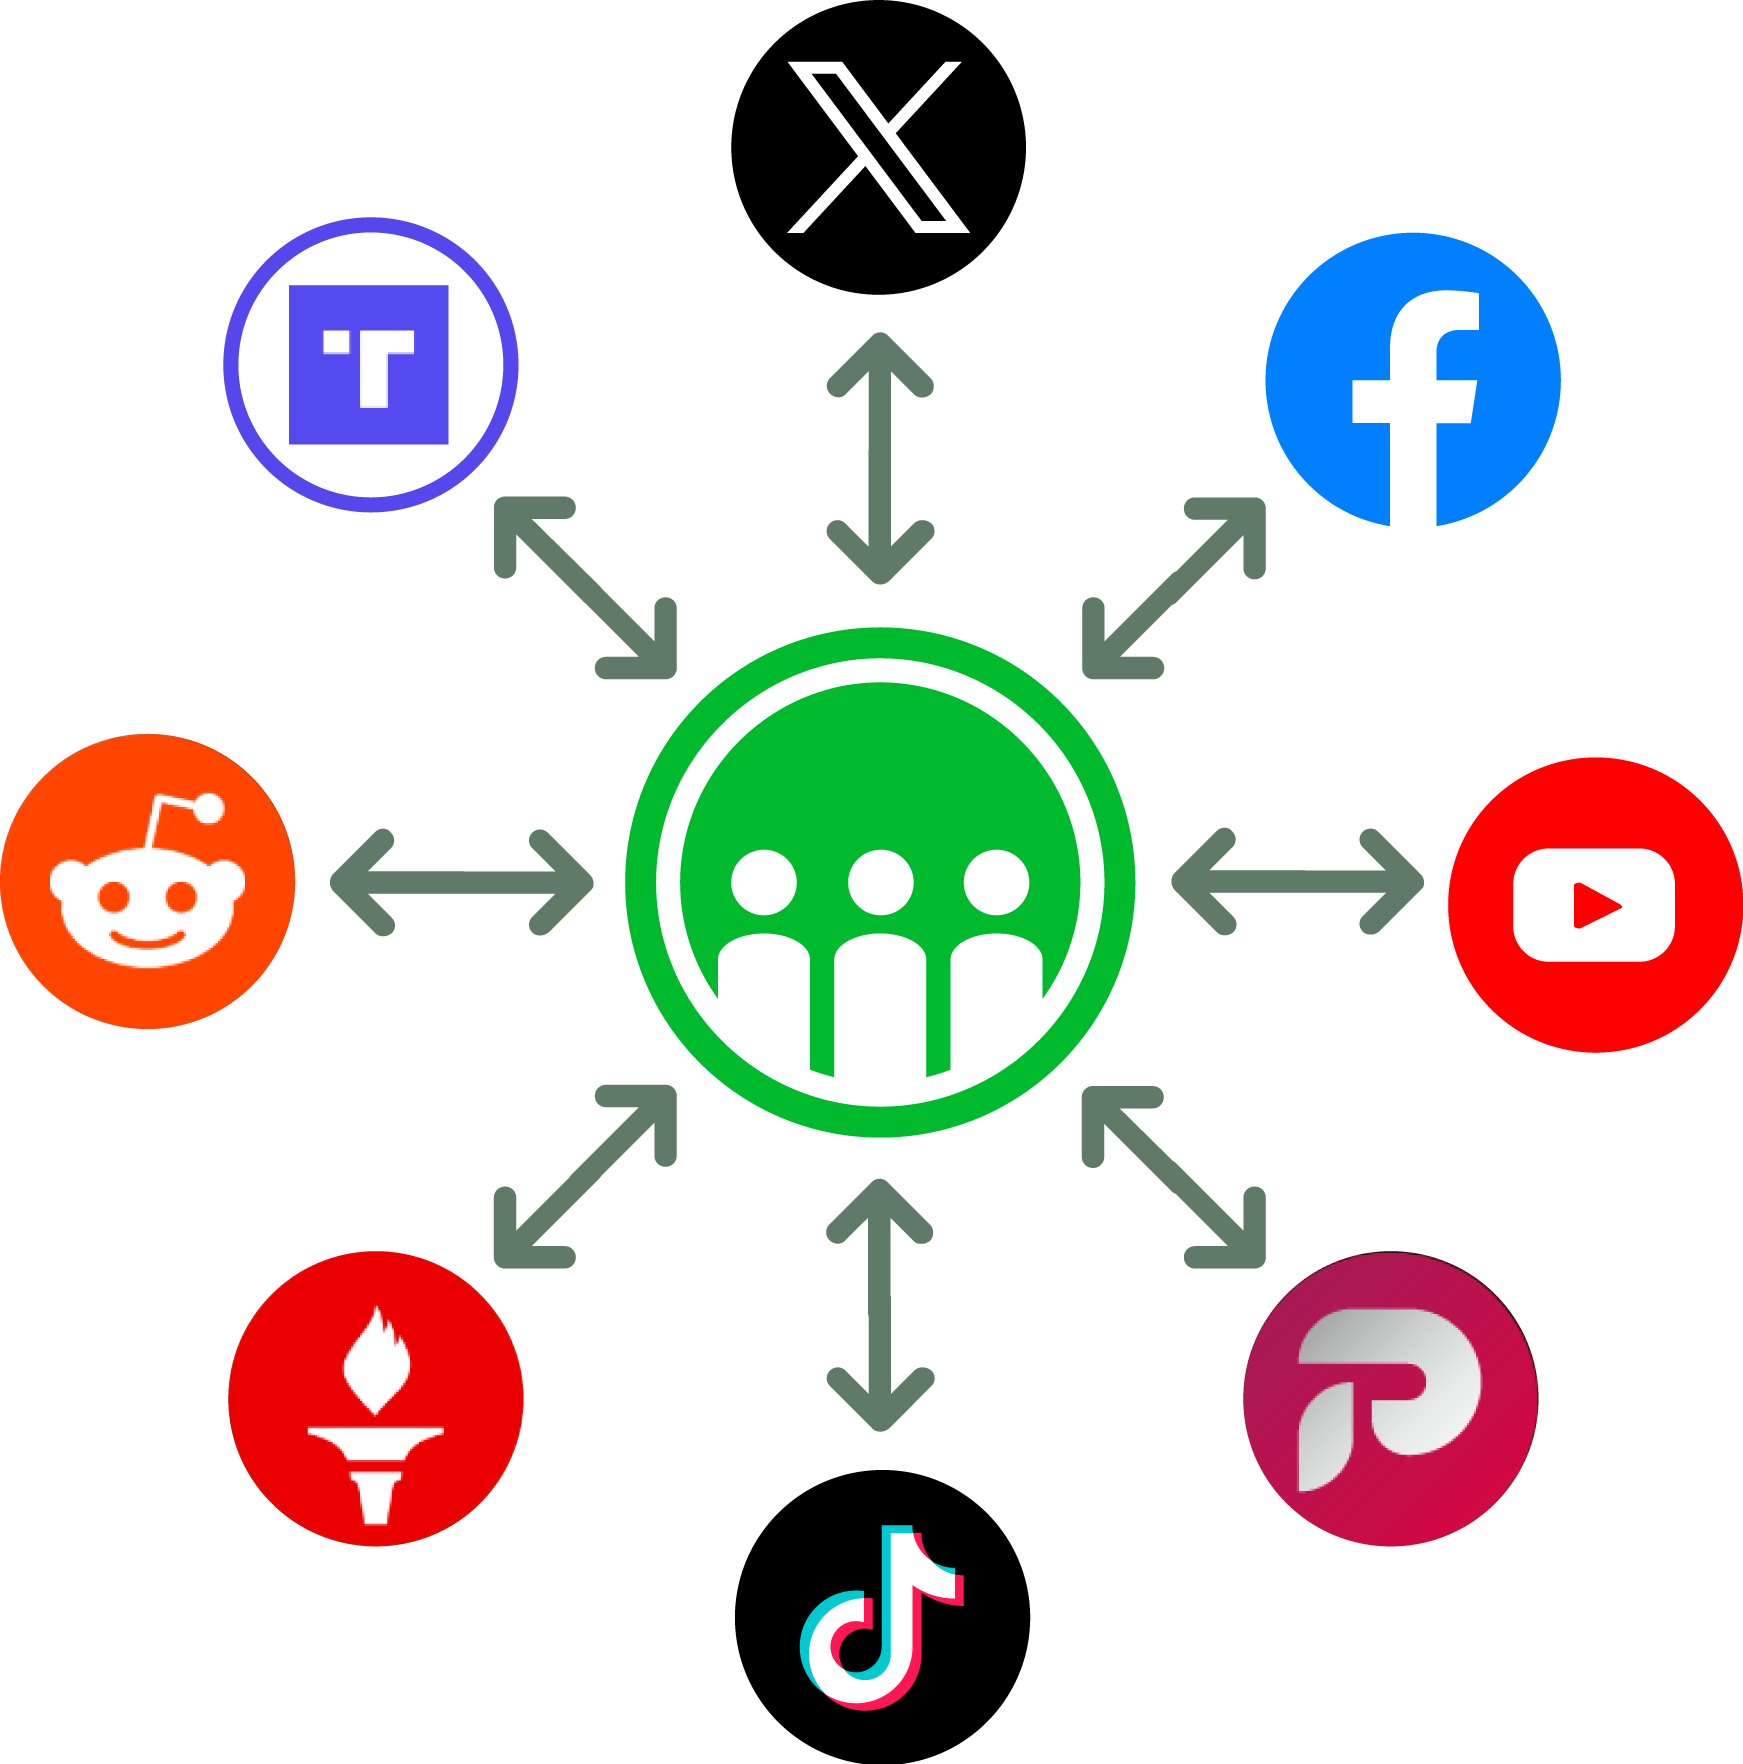 Crowdscore logo surronded by social media logos with double-sided arrows pointing to each